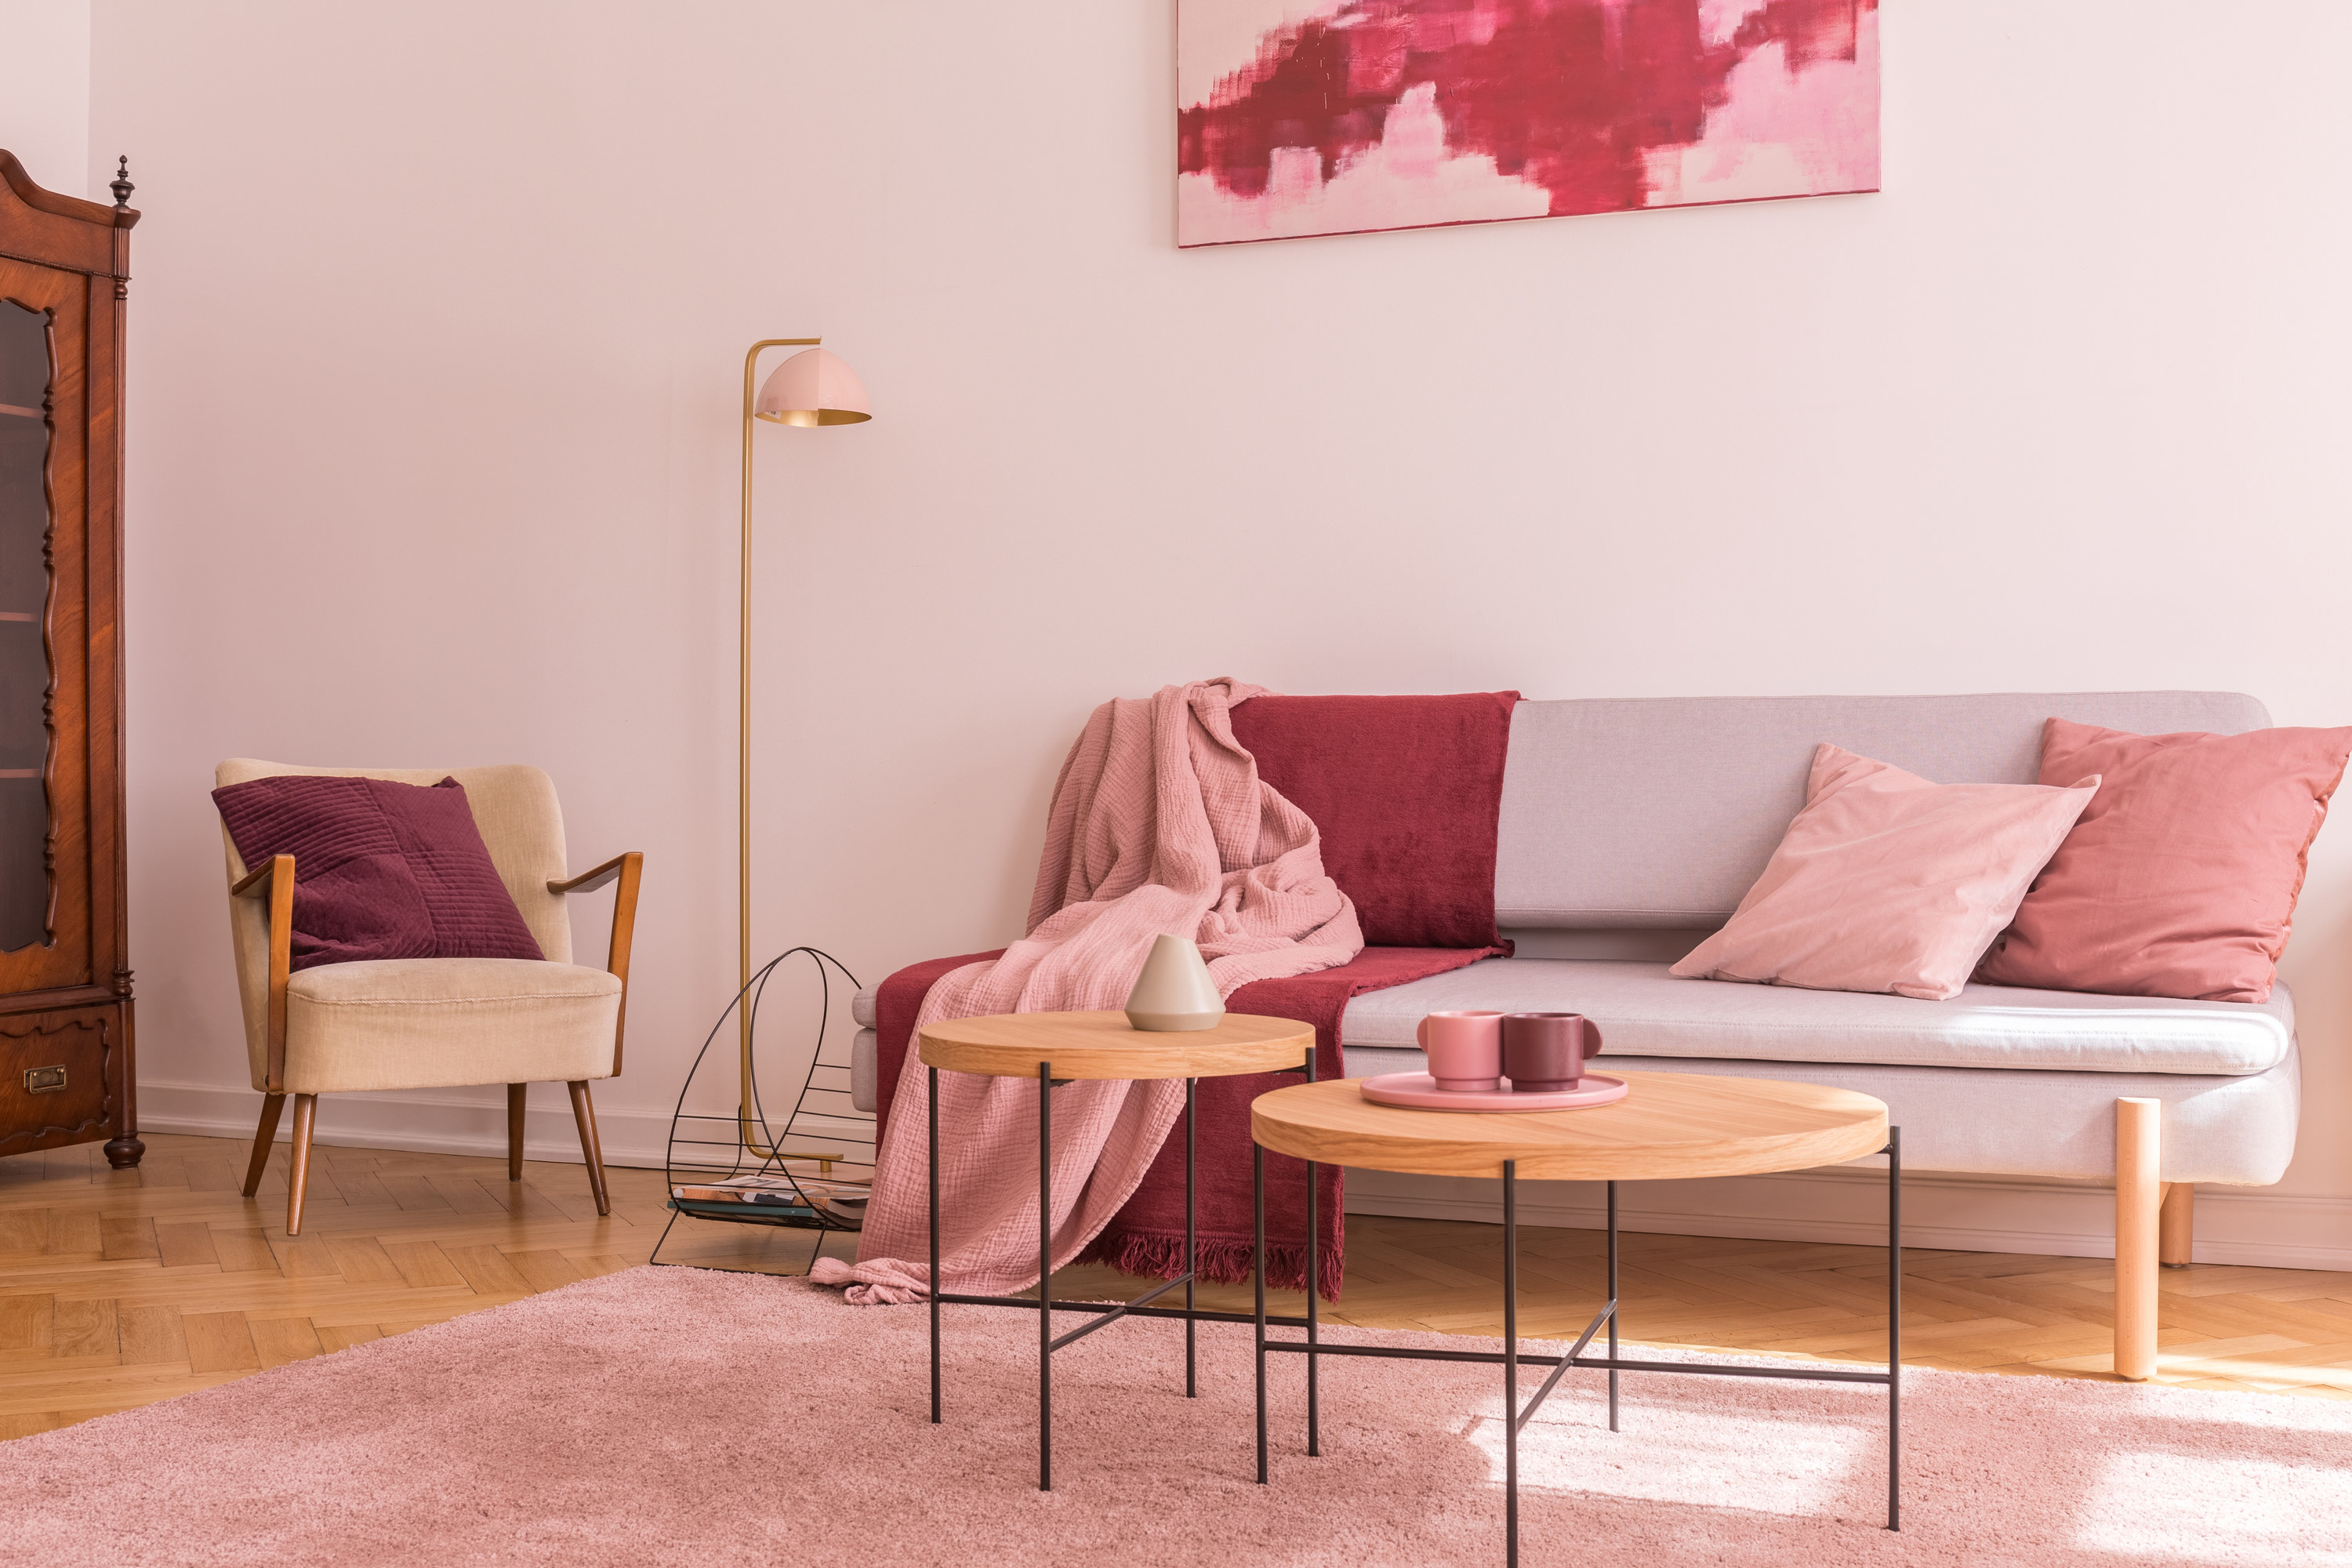 two wooden coffee tables with pink coffee mugs on them next to modern grey sofa with pillows and blankets in different shades of pink, a pink fuzzy rug, a pink lamp, and a pink painting on the wall